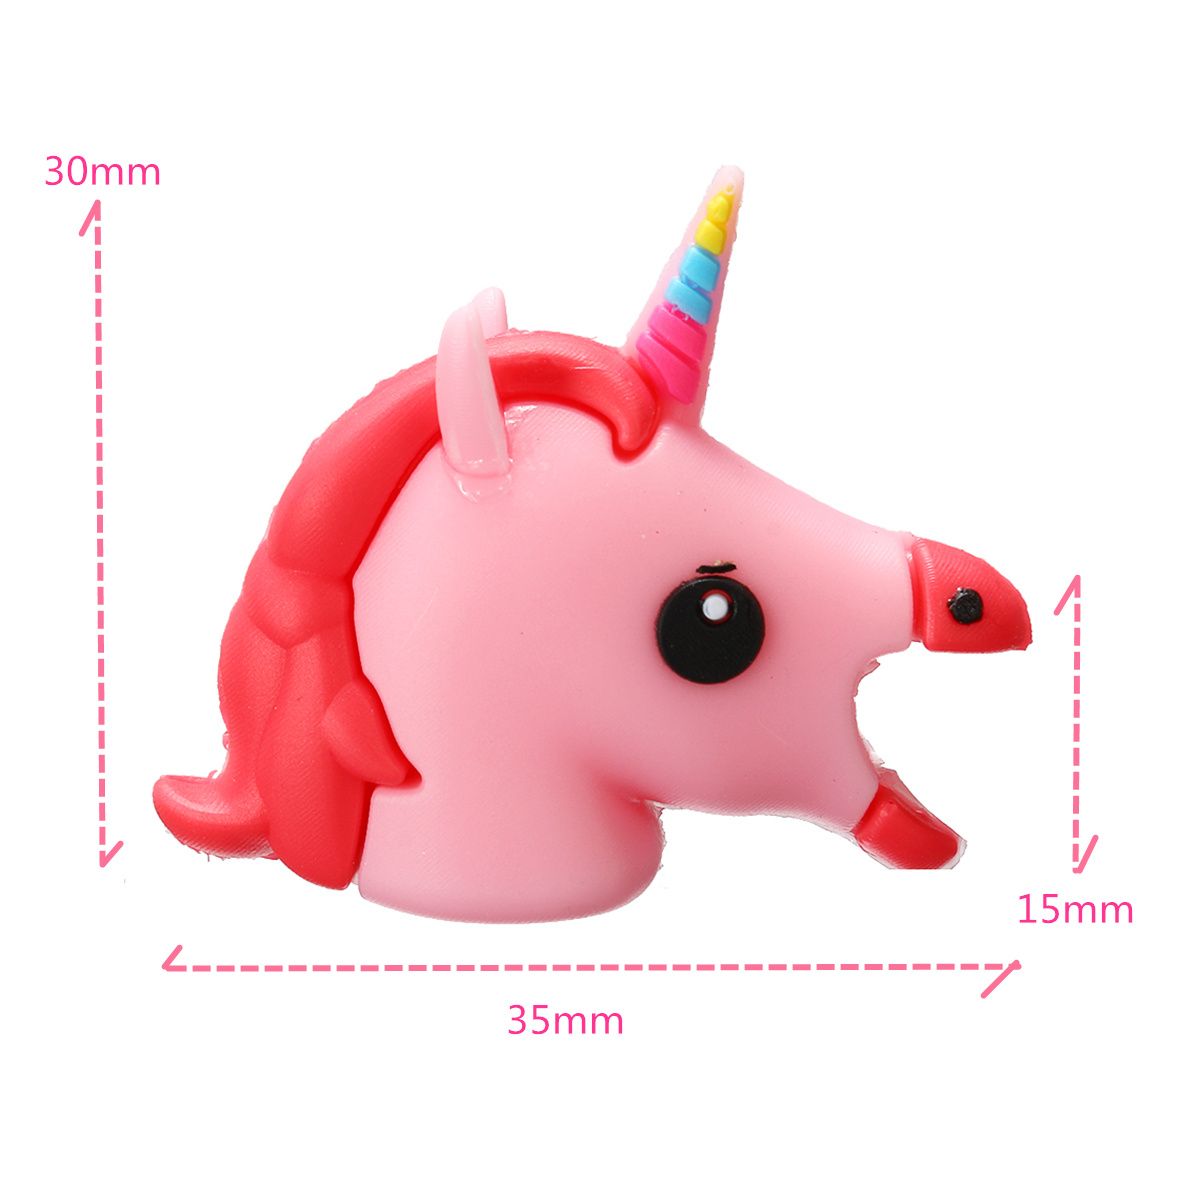 Cable-Accessory-Cable-Animal-Bites-Cartoon-USB-Charger-Data-Cable-Cord-Protector-1517800